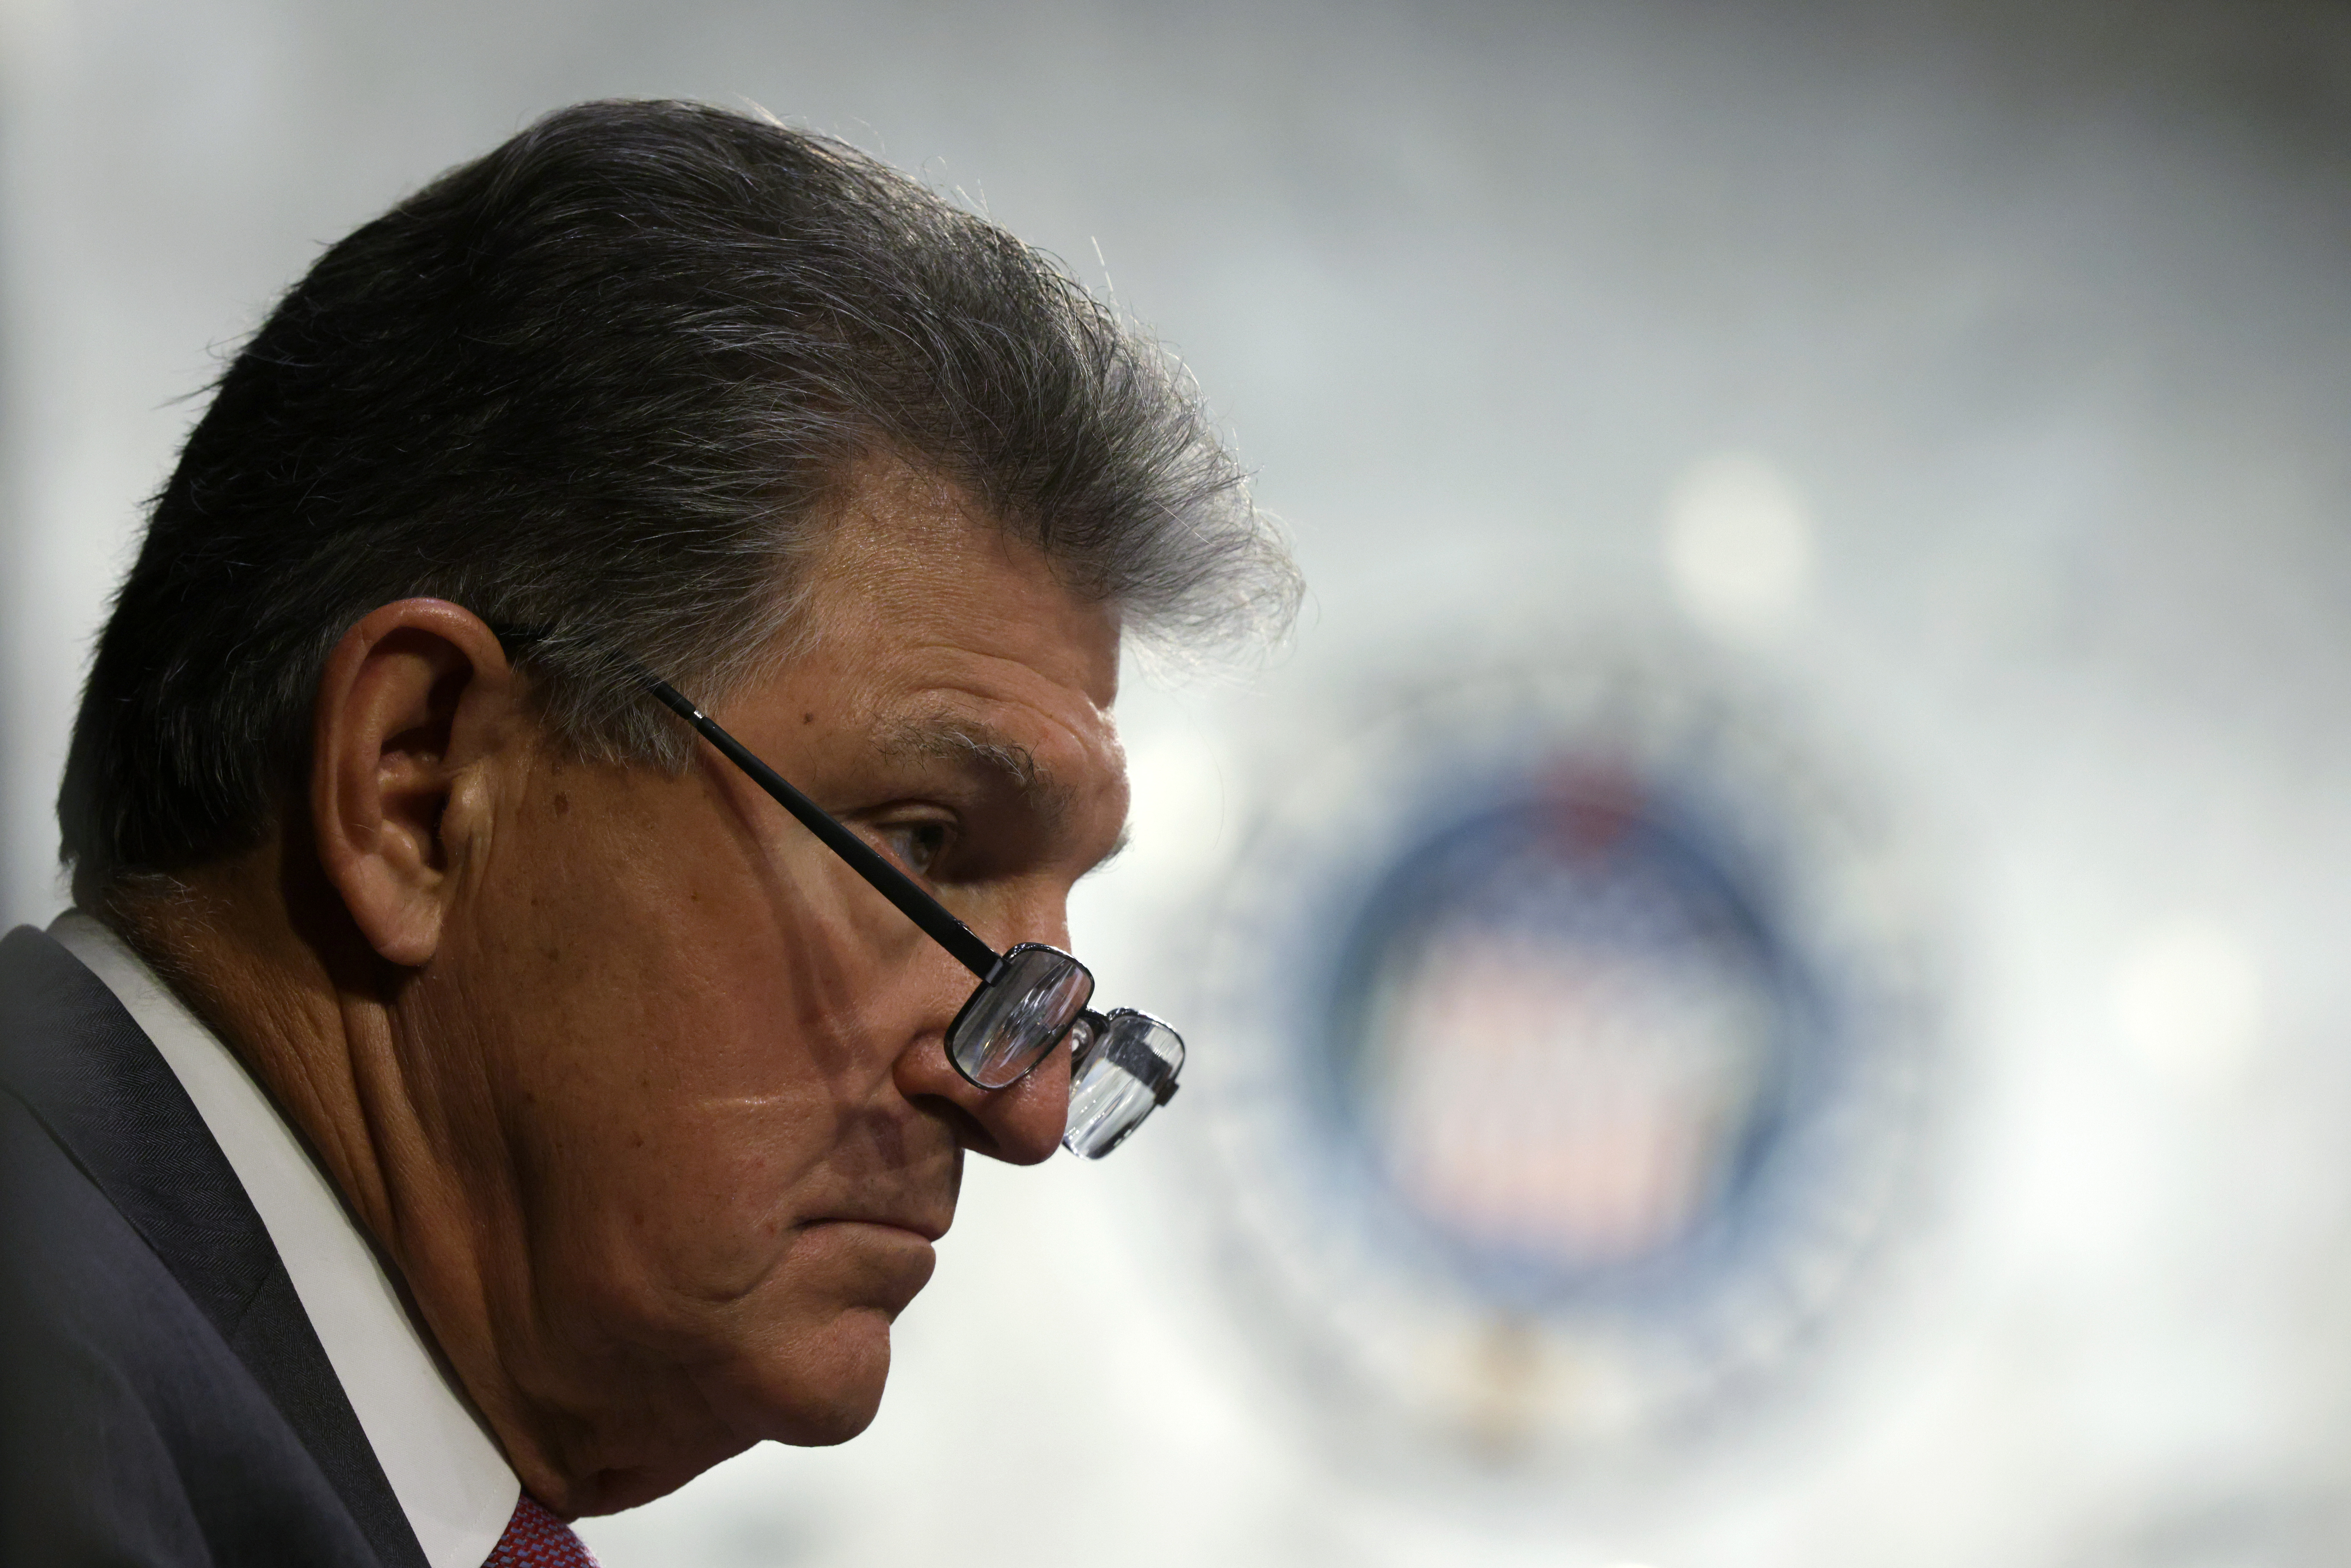 Senator Joe Manchin in profile, with the seal of the Senate on the wall in the background.